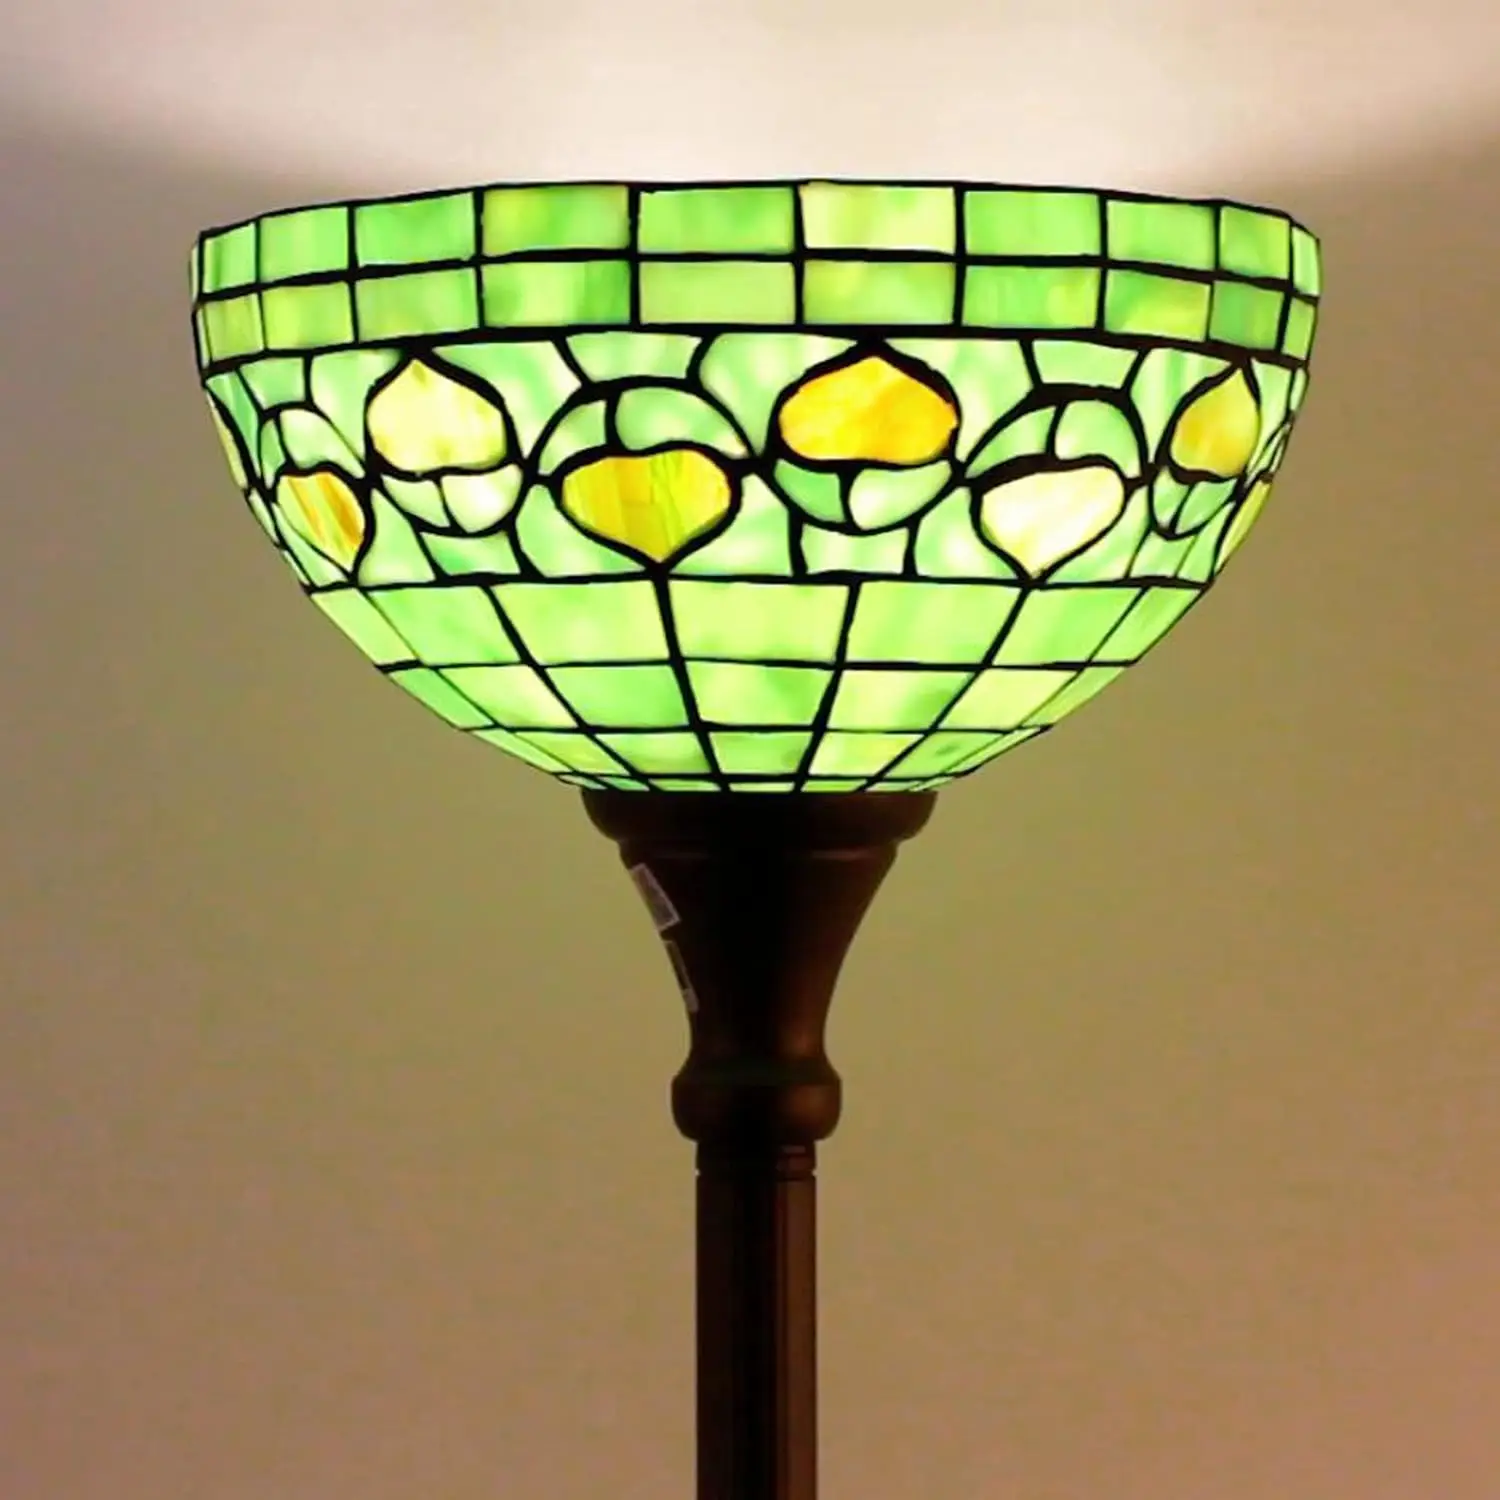 

Tiffany Floor lamp Style Green Stained Glass Shade Standing Torch Light 65Inch high Suitable for Living Room Study Office Light